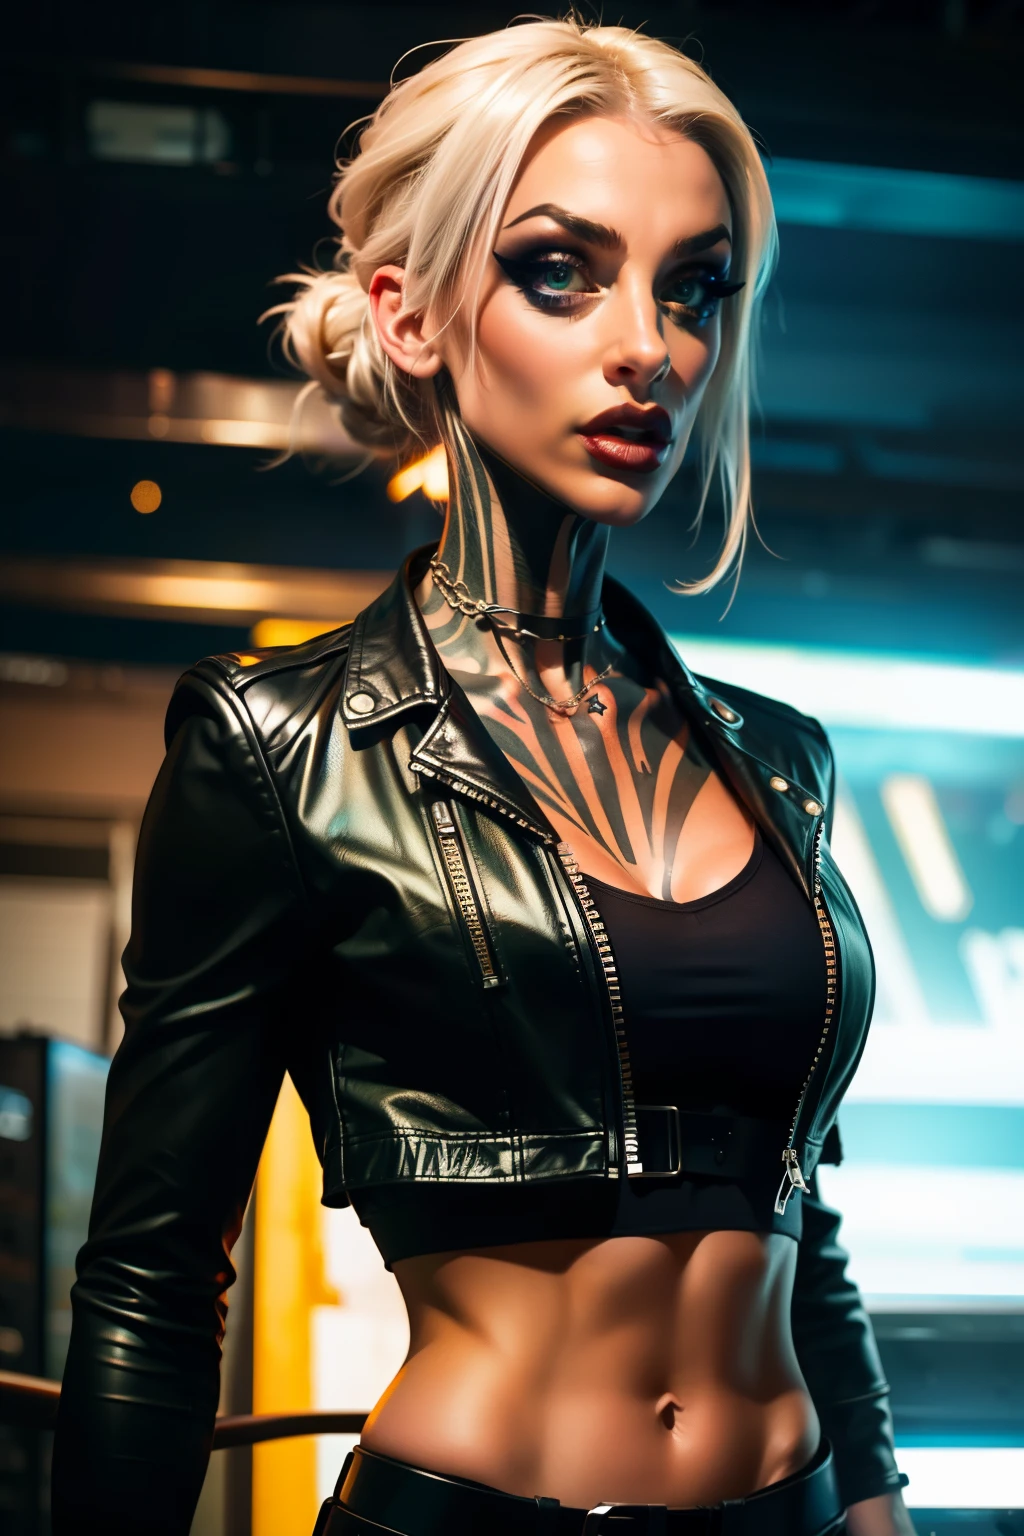 An ultra-realistic CG illustration of  katopunk as gothgirl waifu, solo, piercing gaze and bold makeup,  wearing a leather jacket with a crop top, and her hair is styled in a sleek updo.